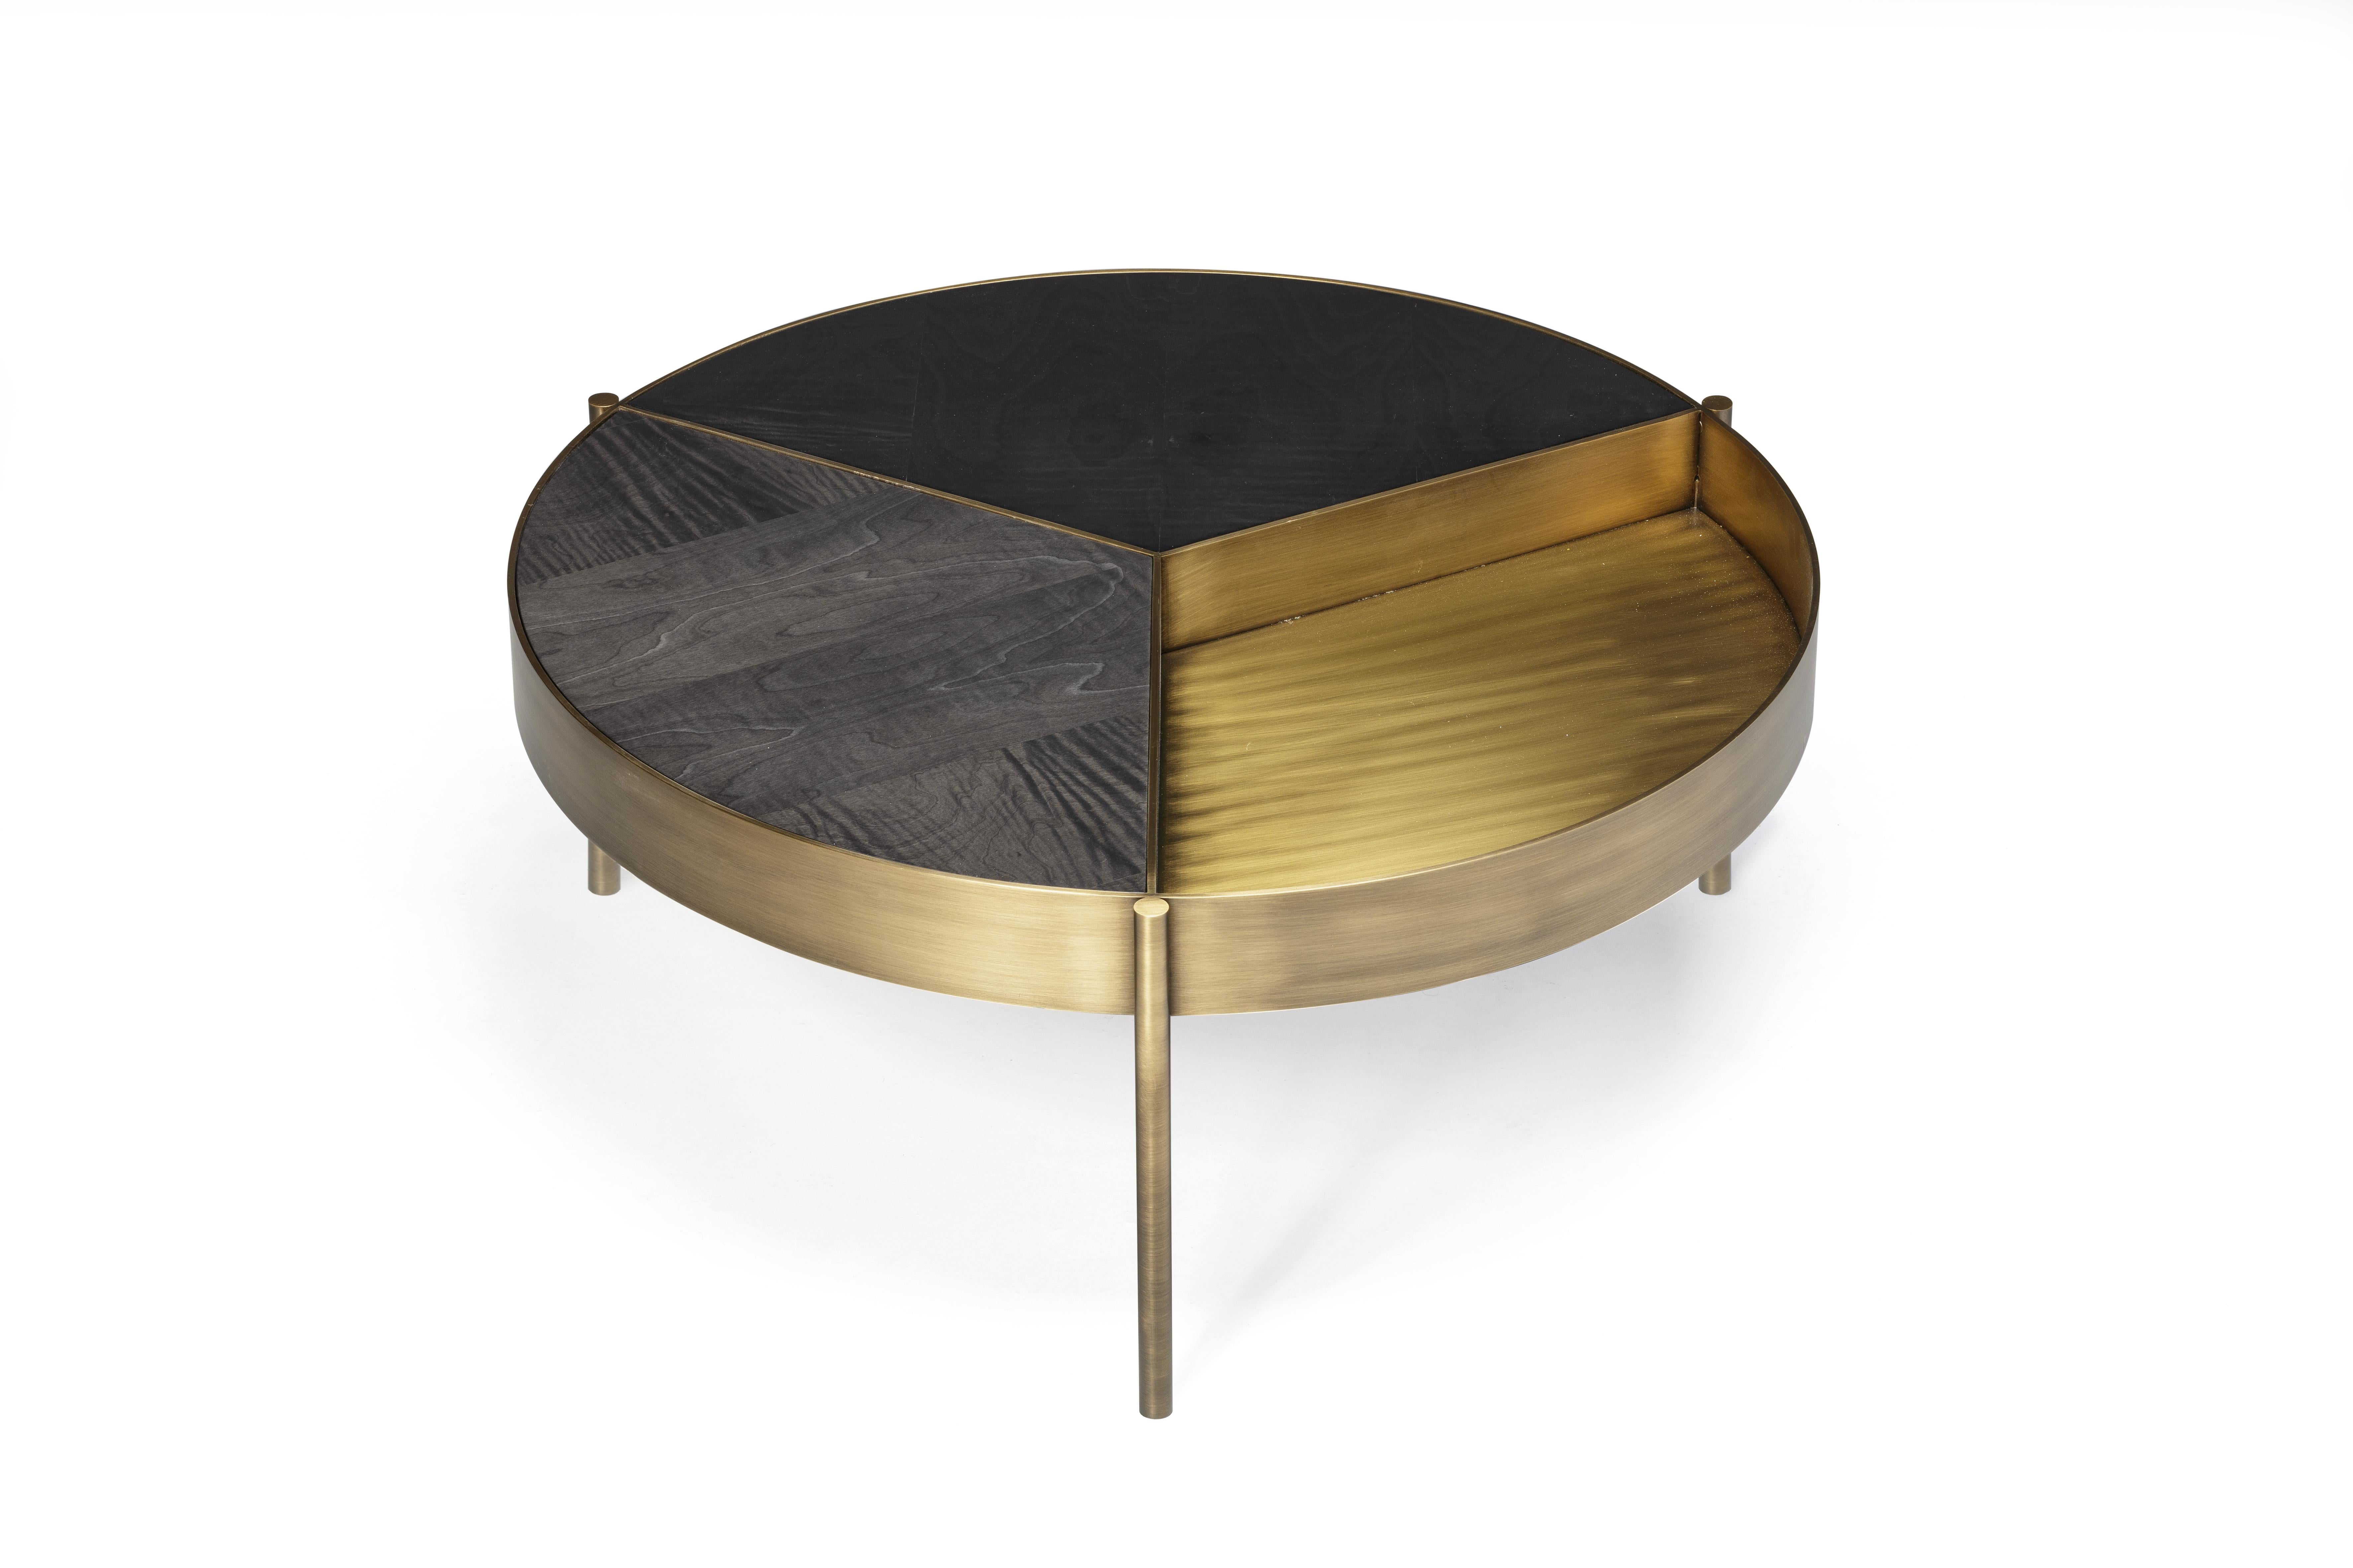 Ray Coffee Table, Bronze Structure and Nero Marquina Top, Handcrafted by Duistt

Ray coffee table is a combination of elegance and versatility. its three delicate rays confine division to the tabletop, allowing customization and creativity with our